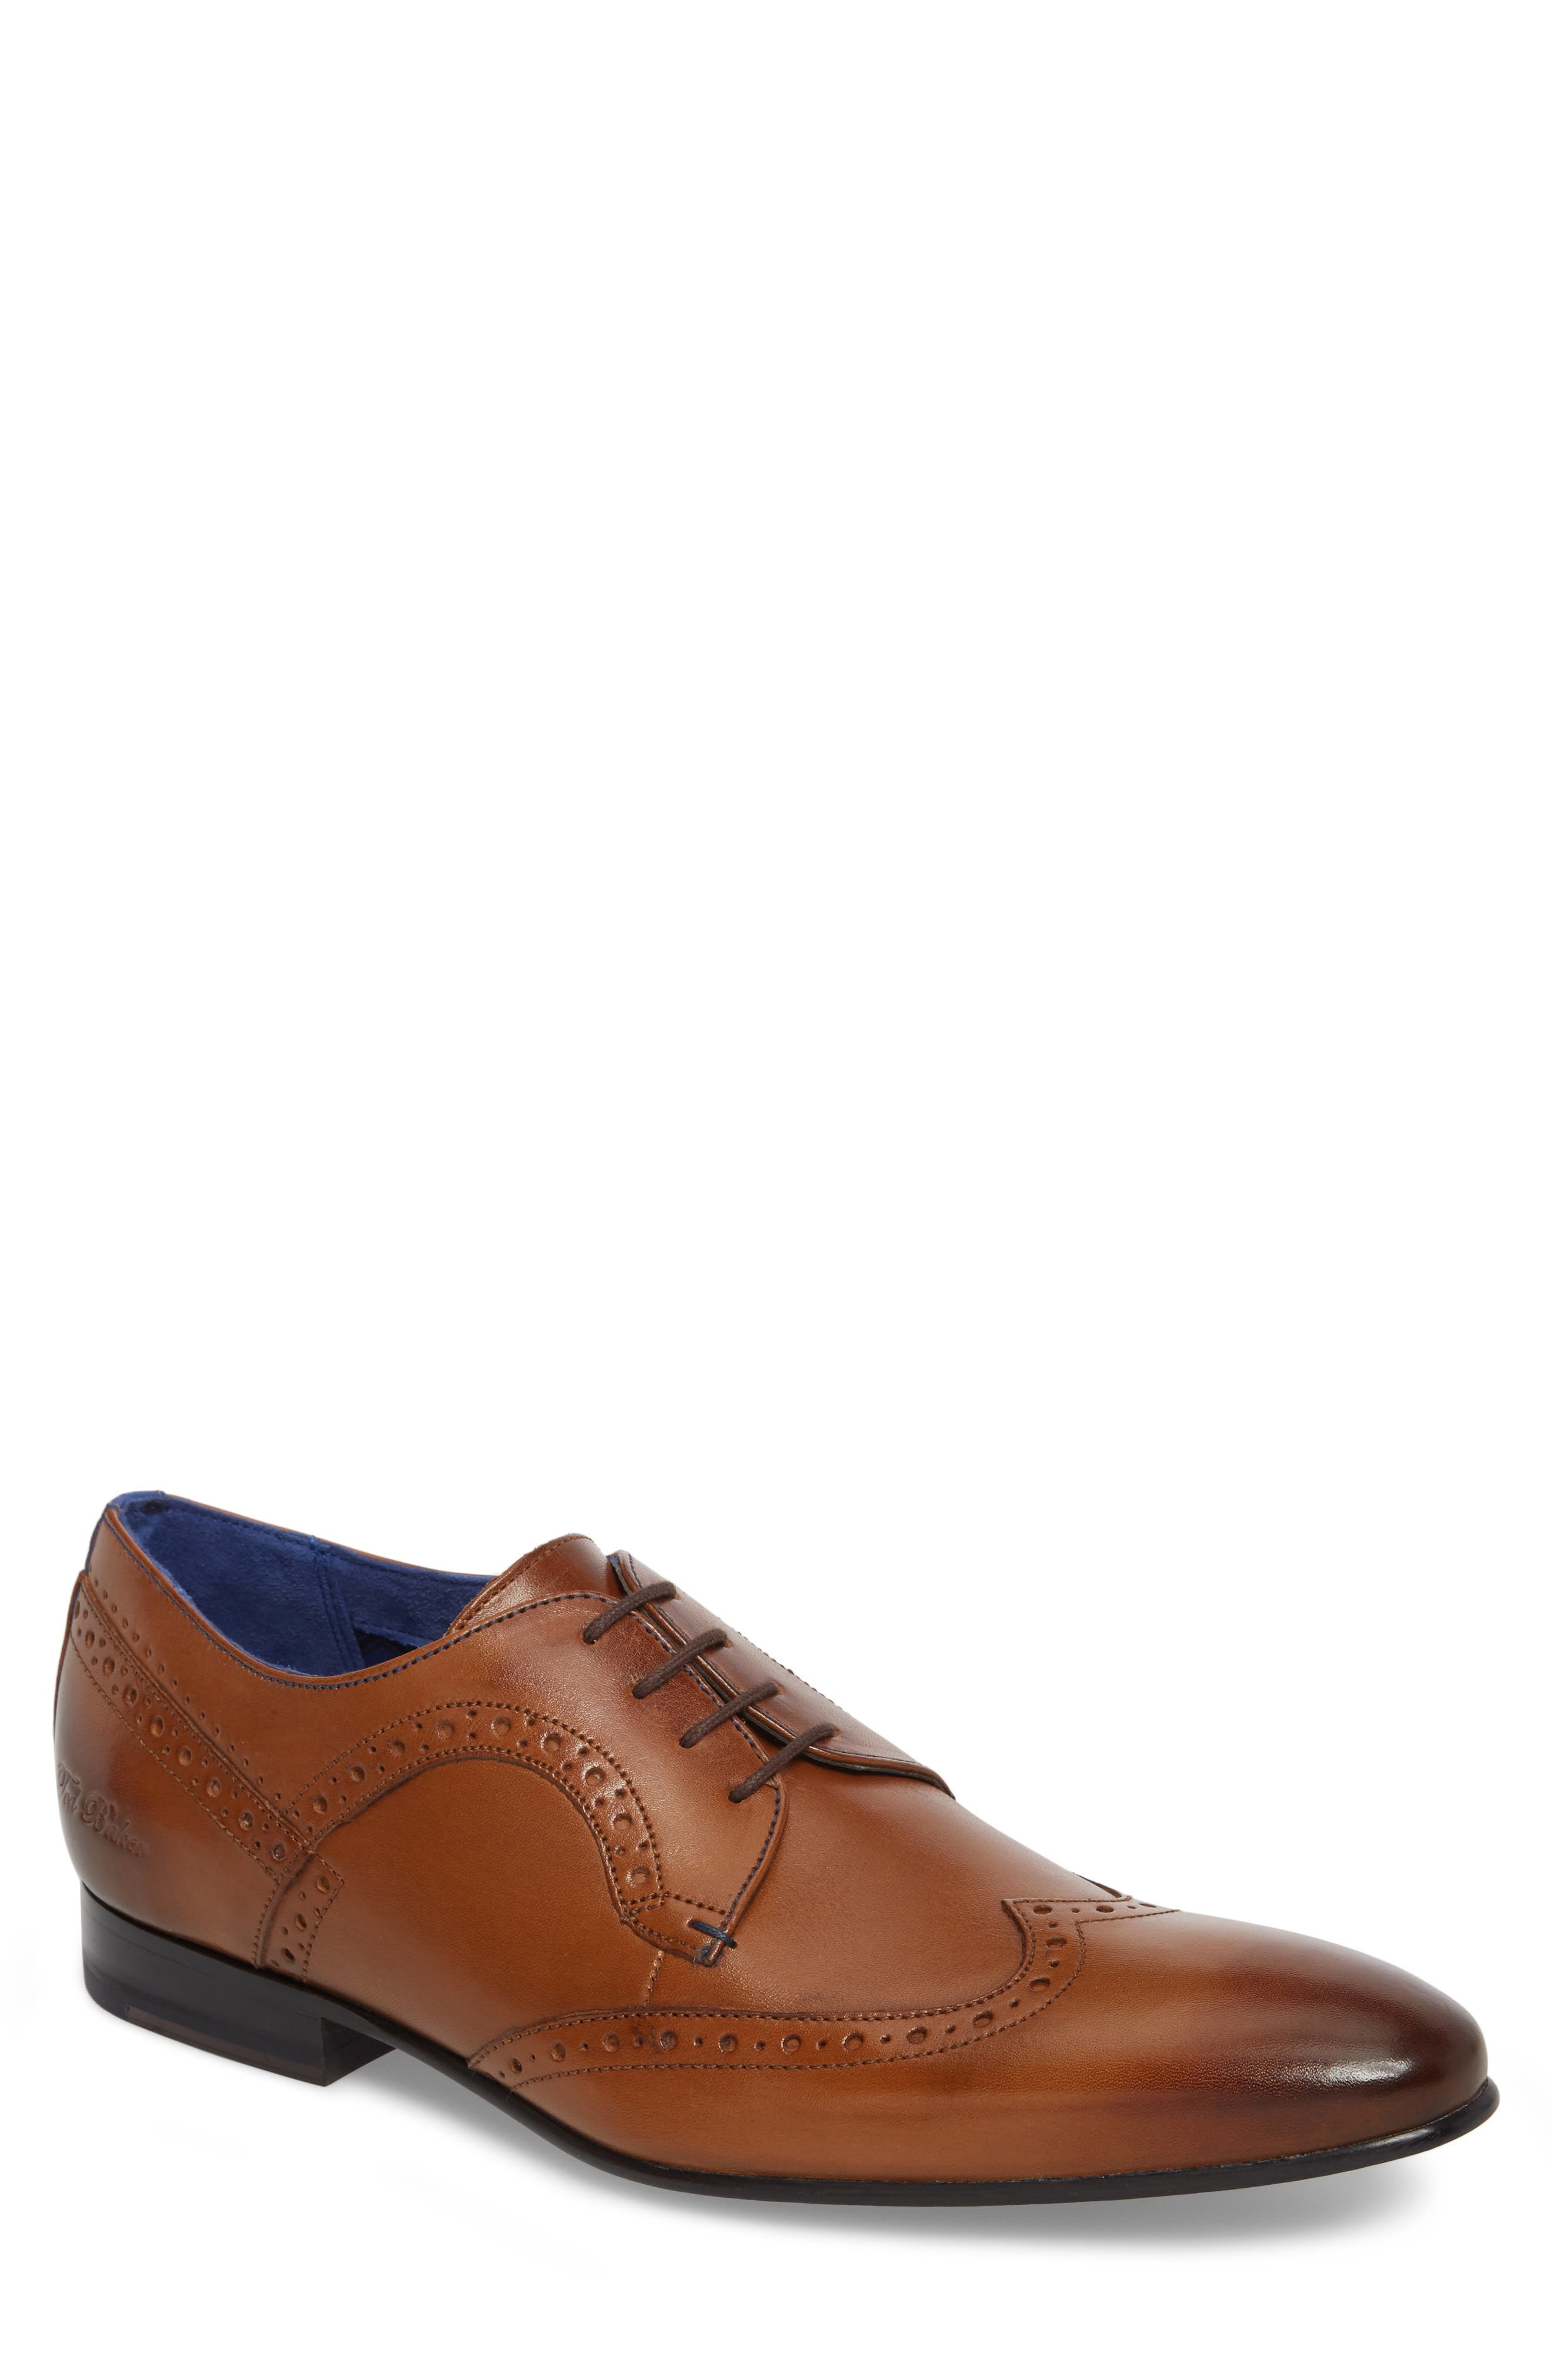 ollivur ted baker shoes